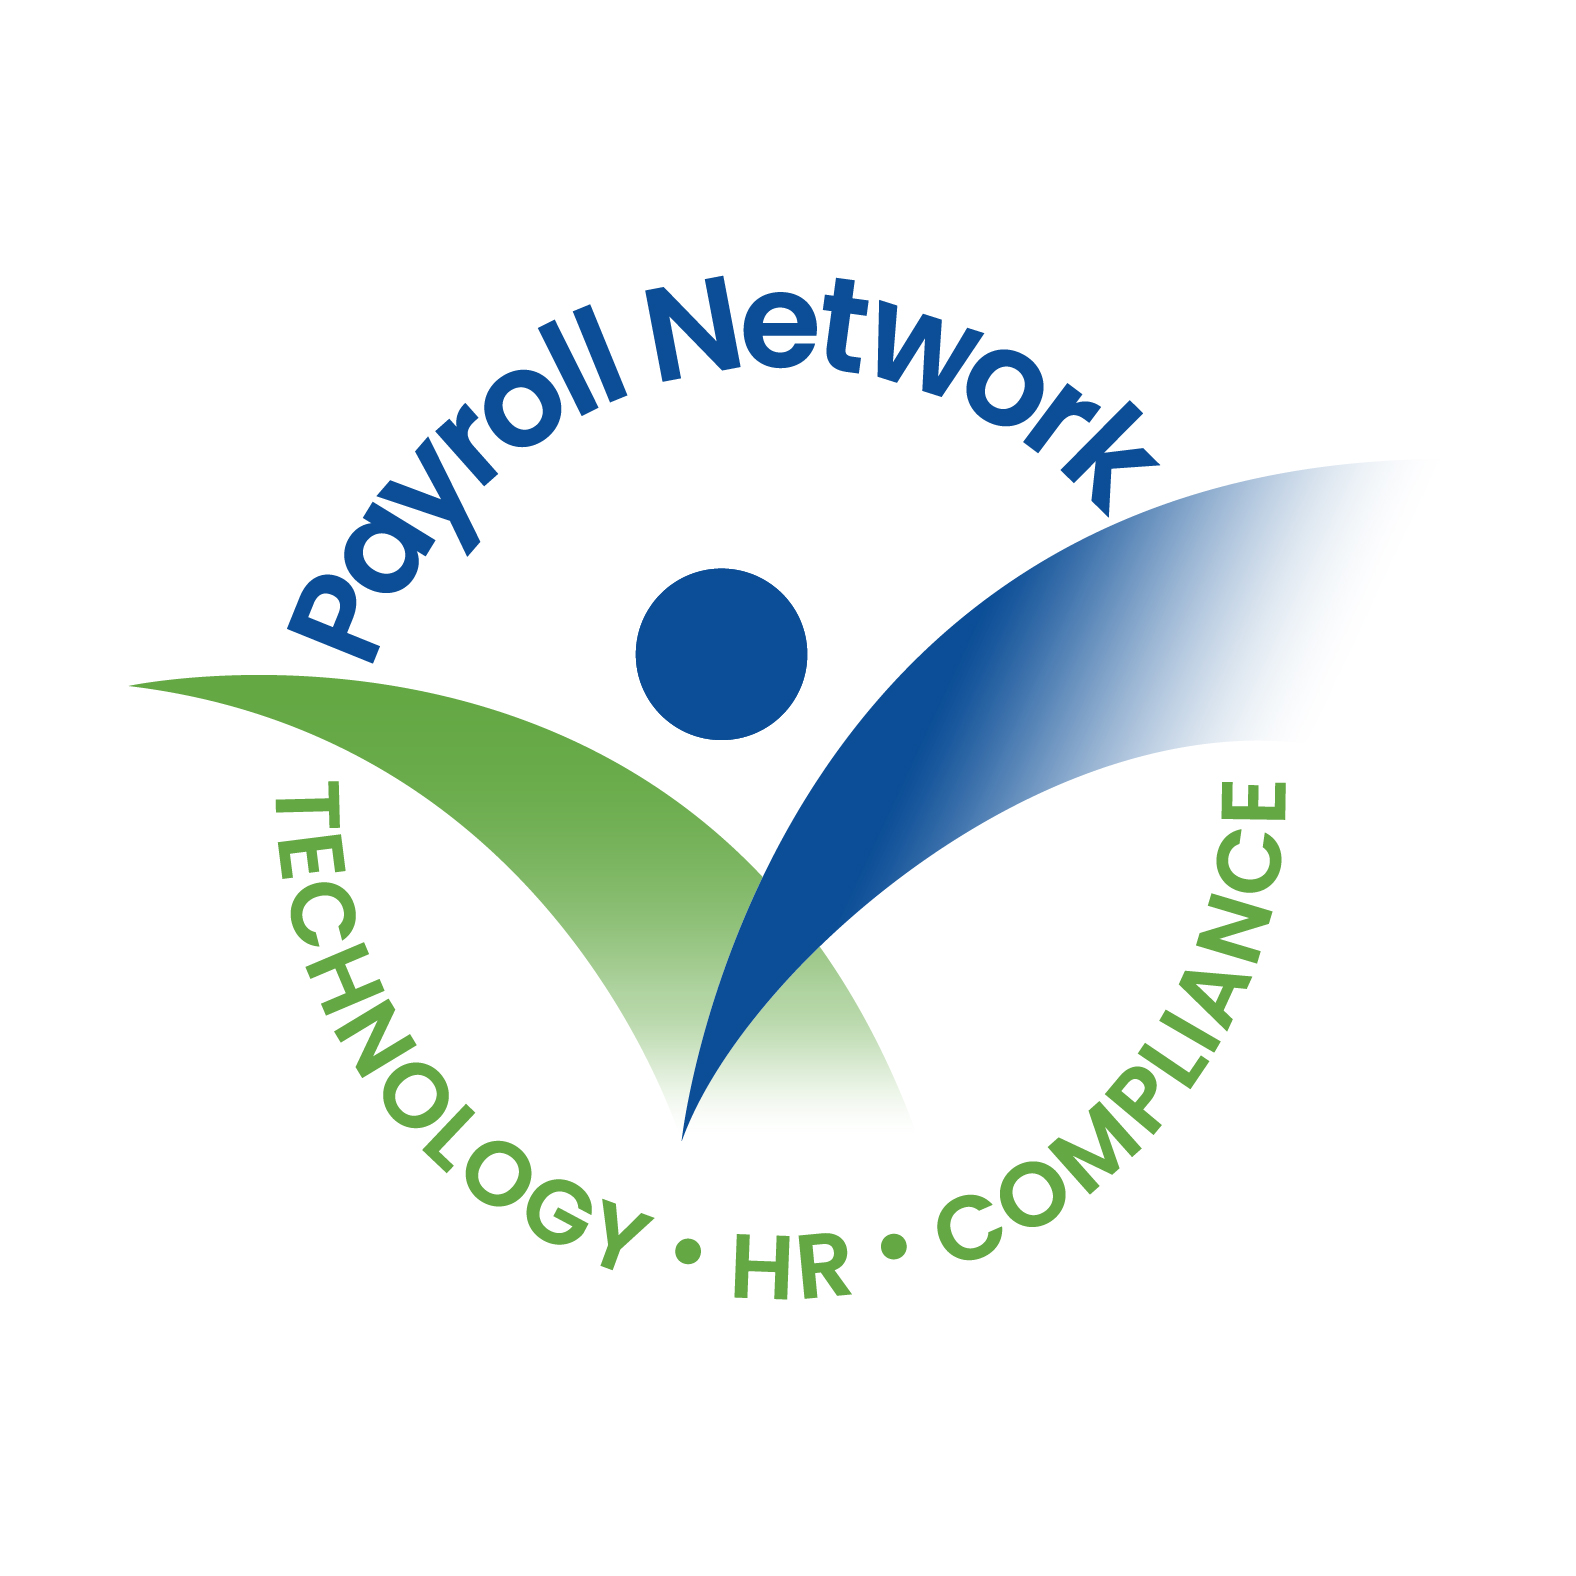 Payroll Network, Inc. (PNI) Sponsors DisruptHR’s Colorado Conference, Aimed at Revolutionizing the HR Industry